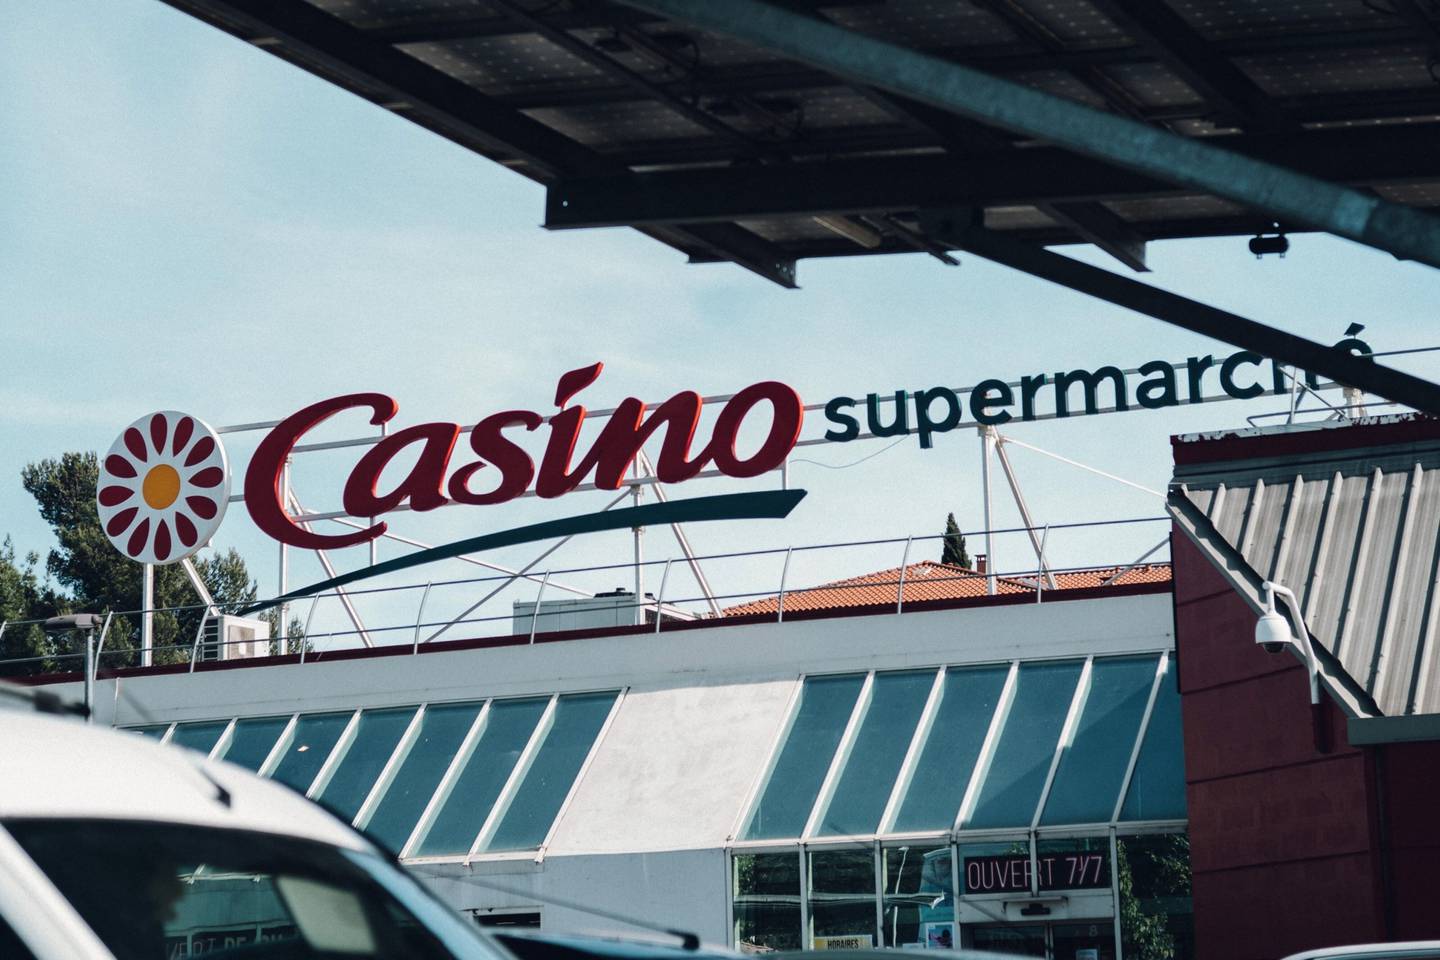 Casino Is Said to Raise $783 Million With Assai Sale in Brazil.